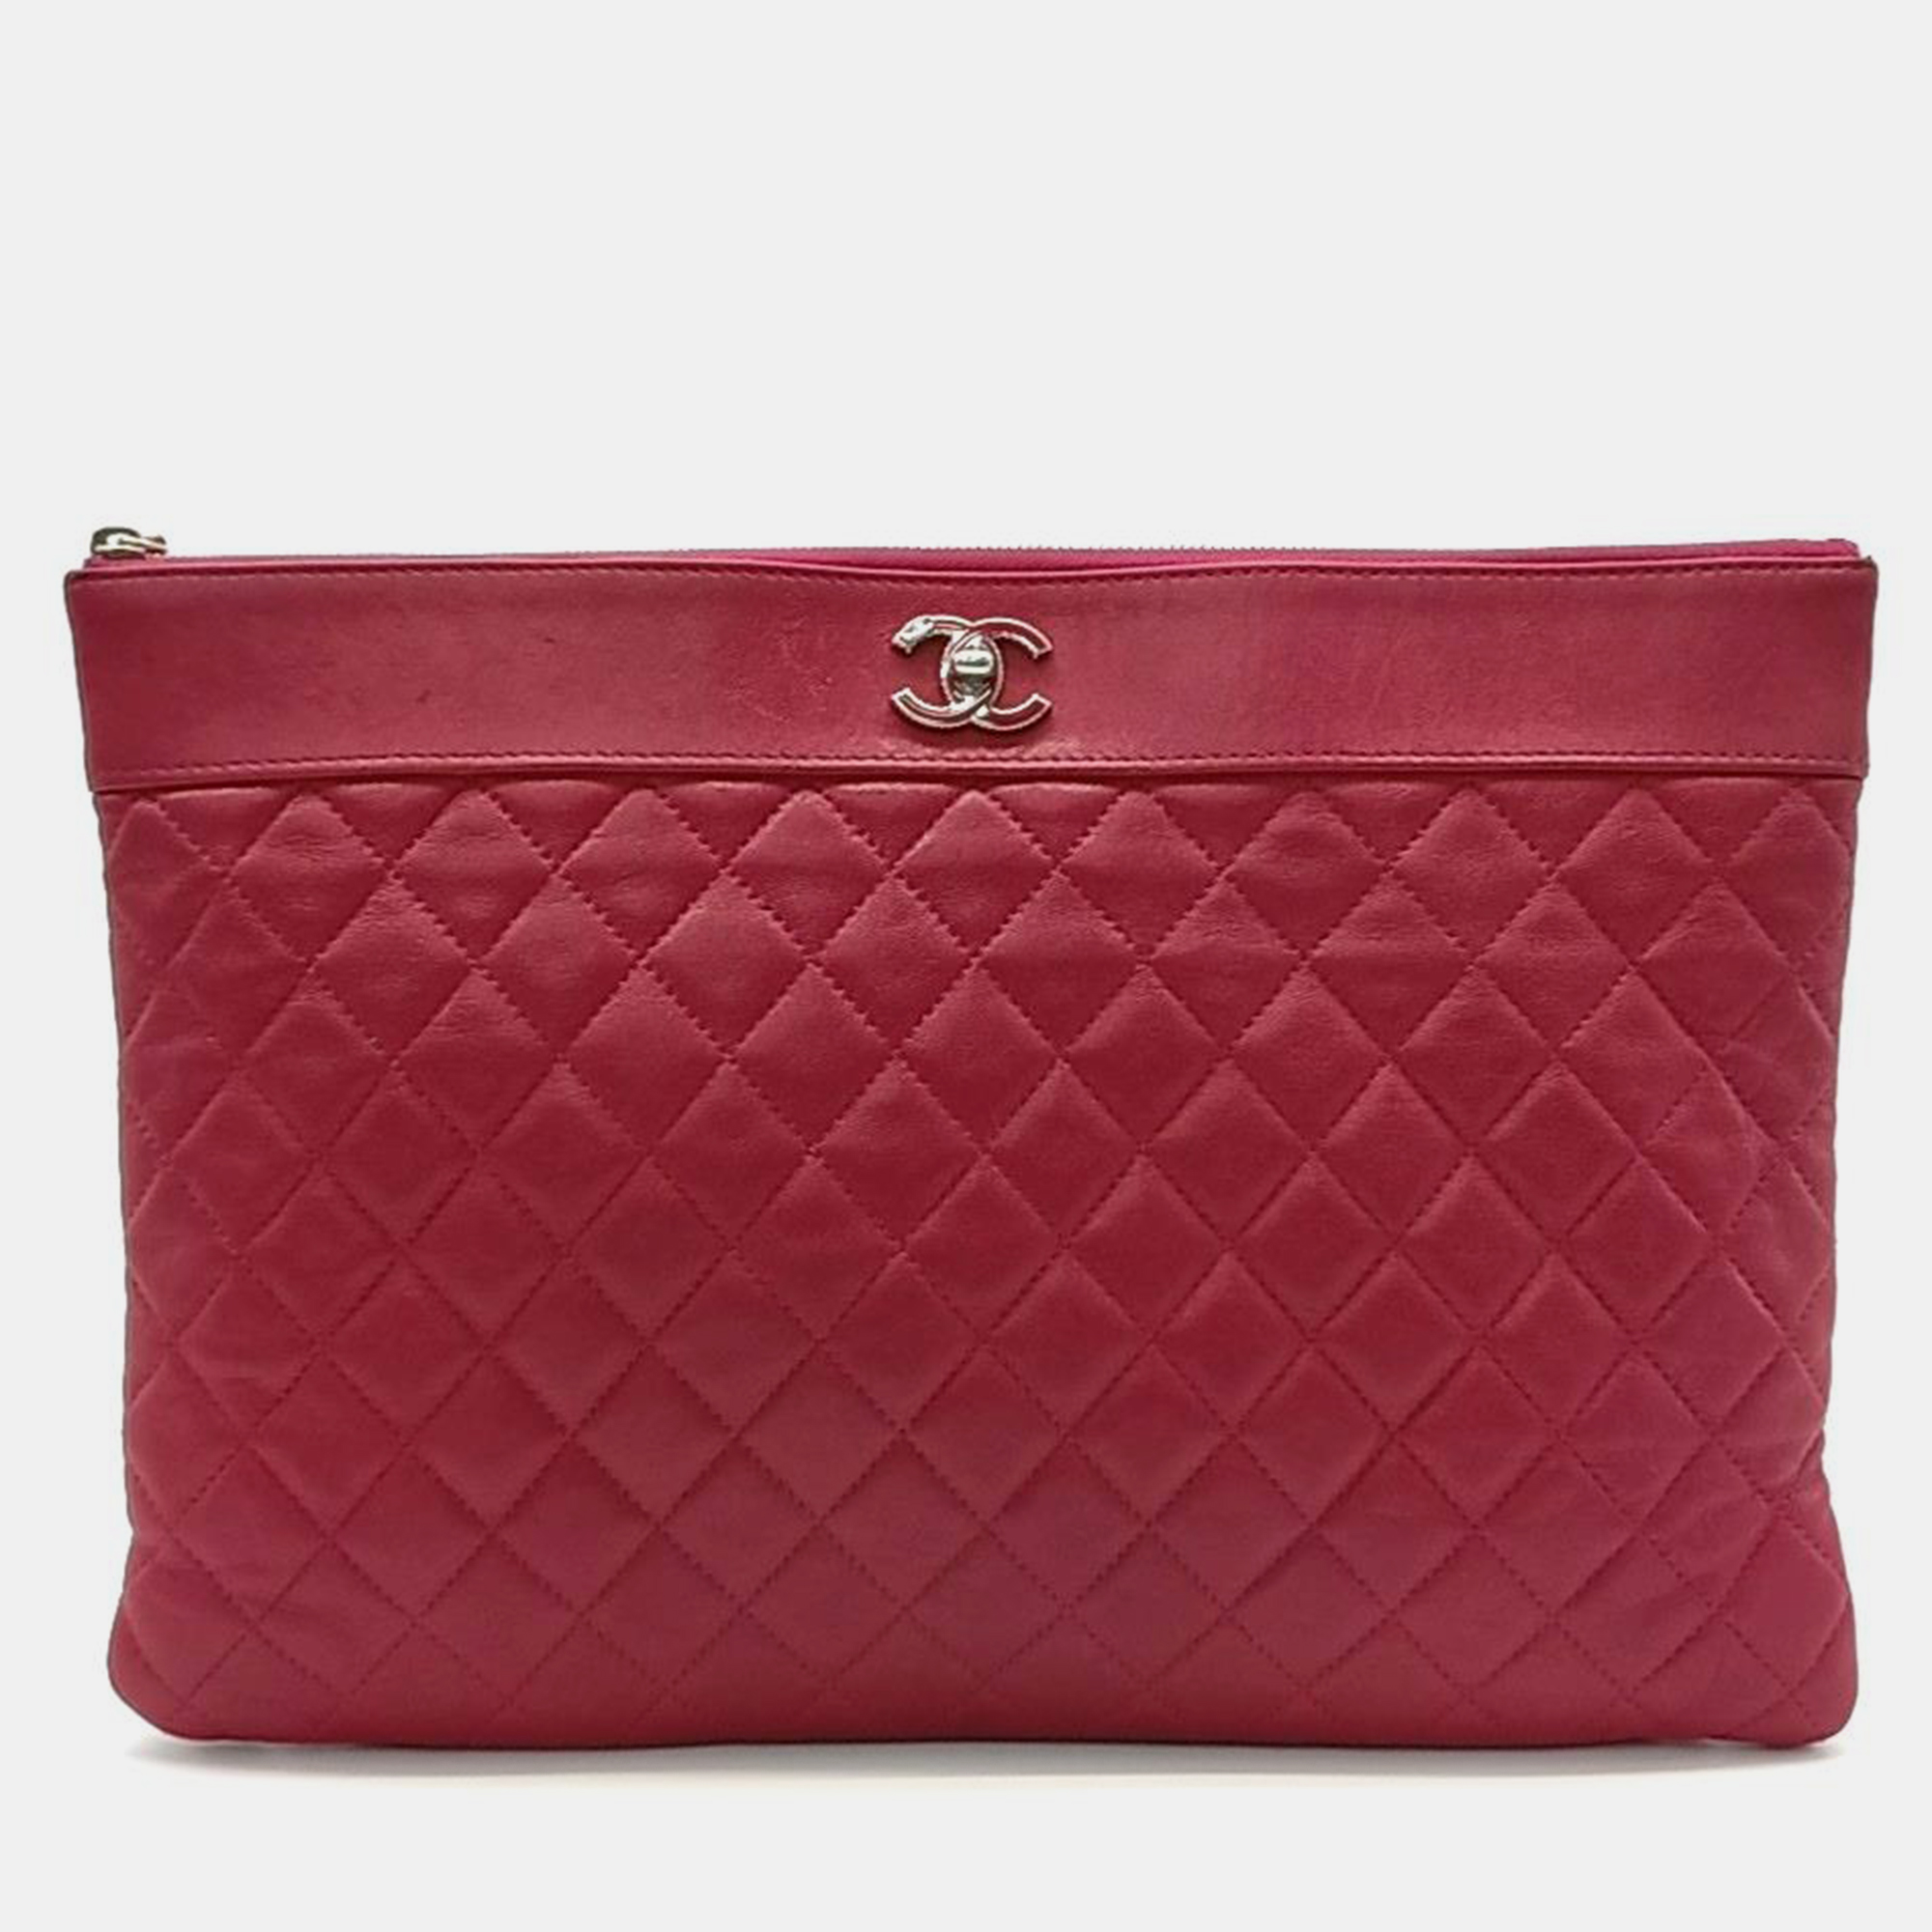 

Chanel Mademoiselle Large Clutch, Red